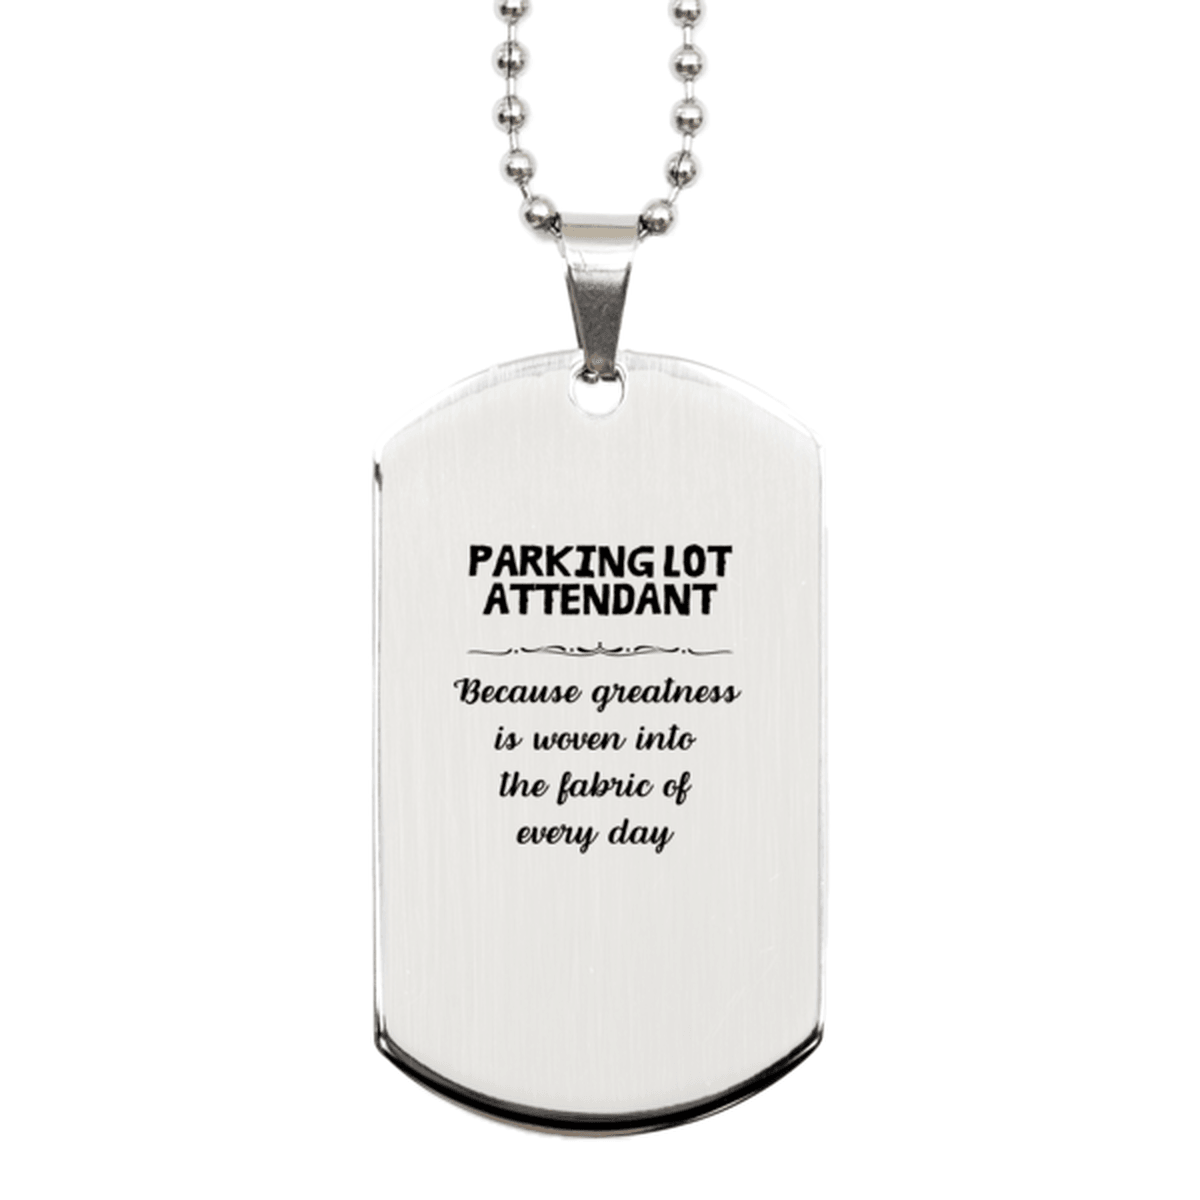 Sarcastic Parking Lot Attendant Silver Dog Tag Gifts, Christmas Holiday Gifts for Parking Lot Attendant Birthday, Parking Lot Attendant: Because greatness is woven into the fabric of every day, Coworkers, Friends - Mallard Moon Gift Shop